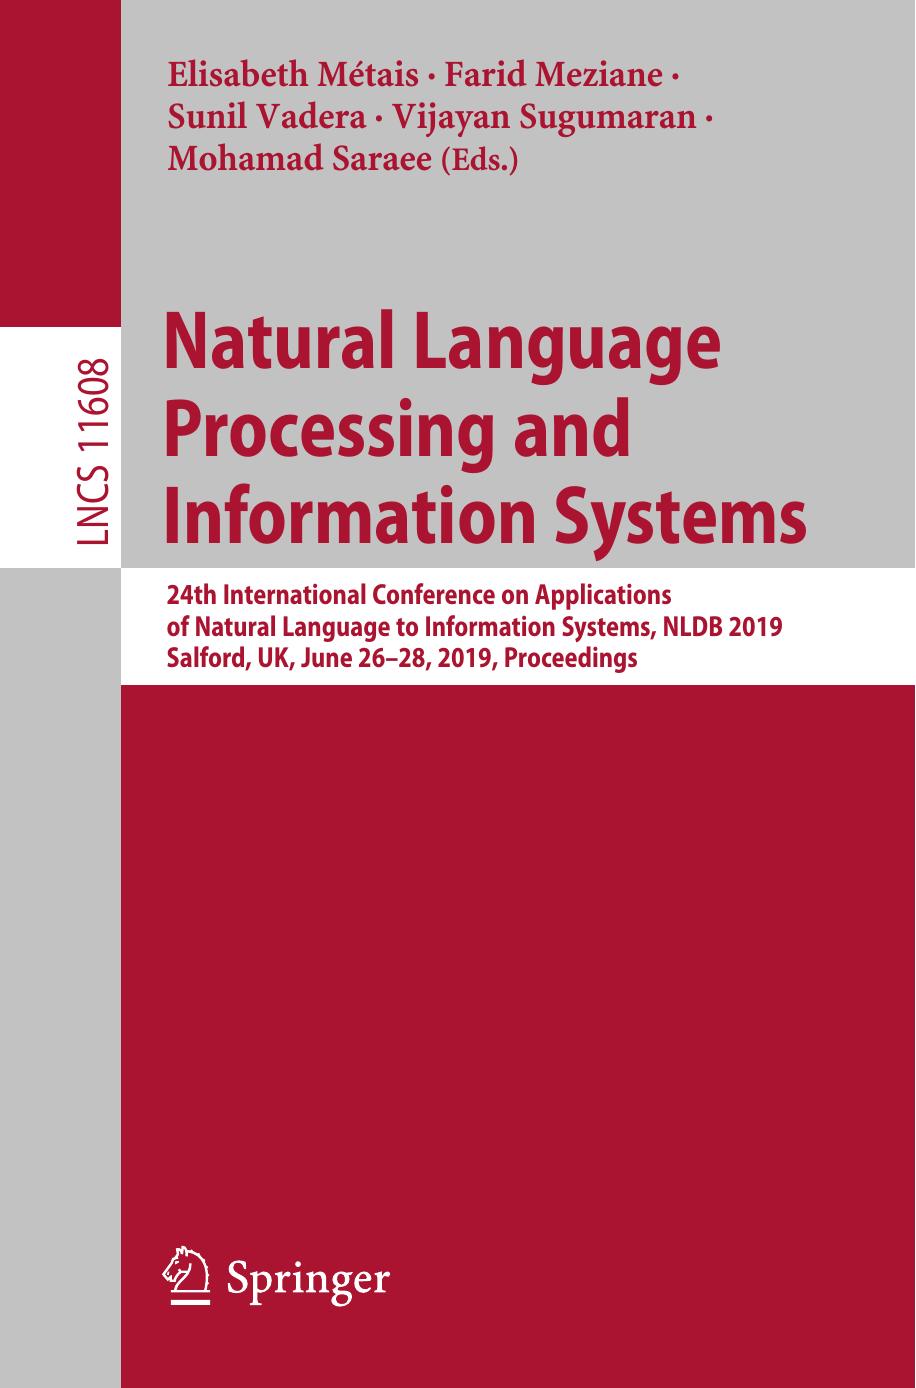 Natural Language Processing and Information Systems: 24th International Conference on Applications of Natural Language to Information Systems, NLDB 2019, Salford, UK, June 26–28, 2019, Proceedings